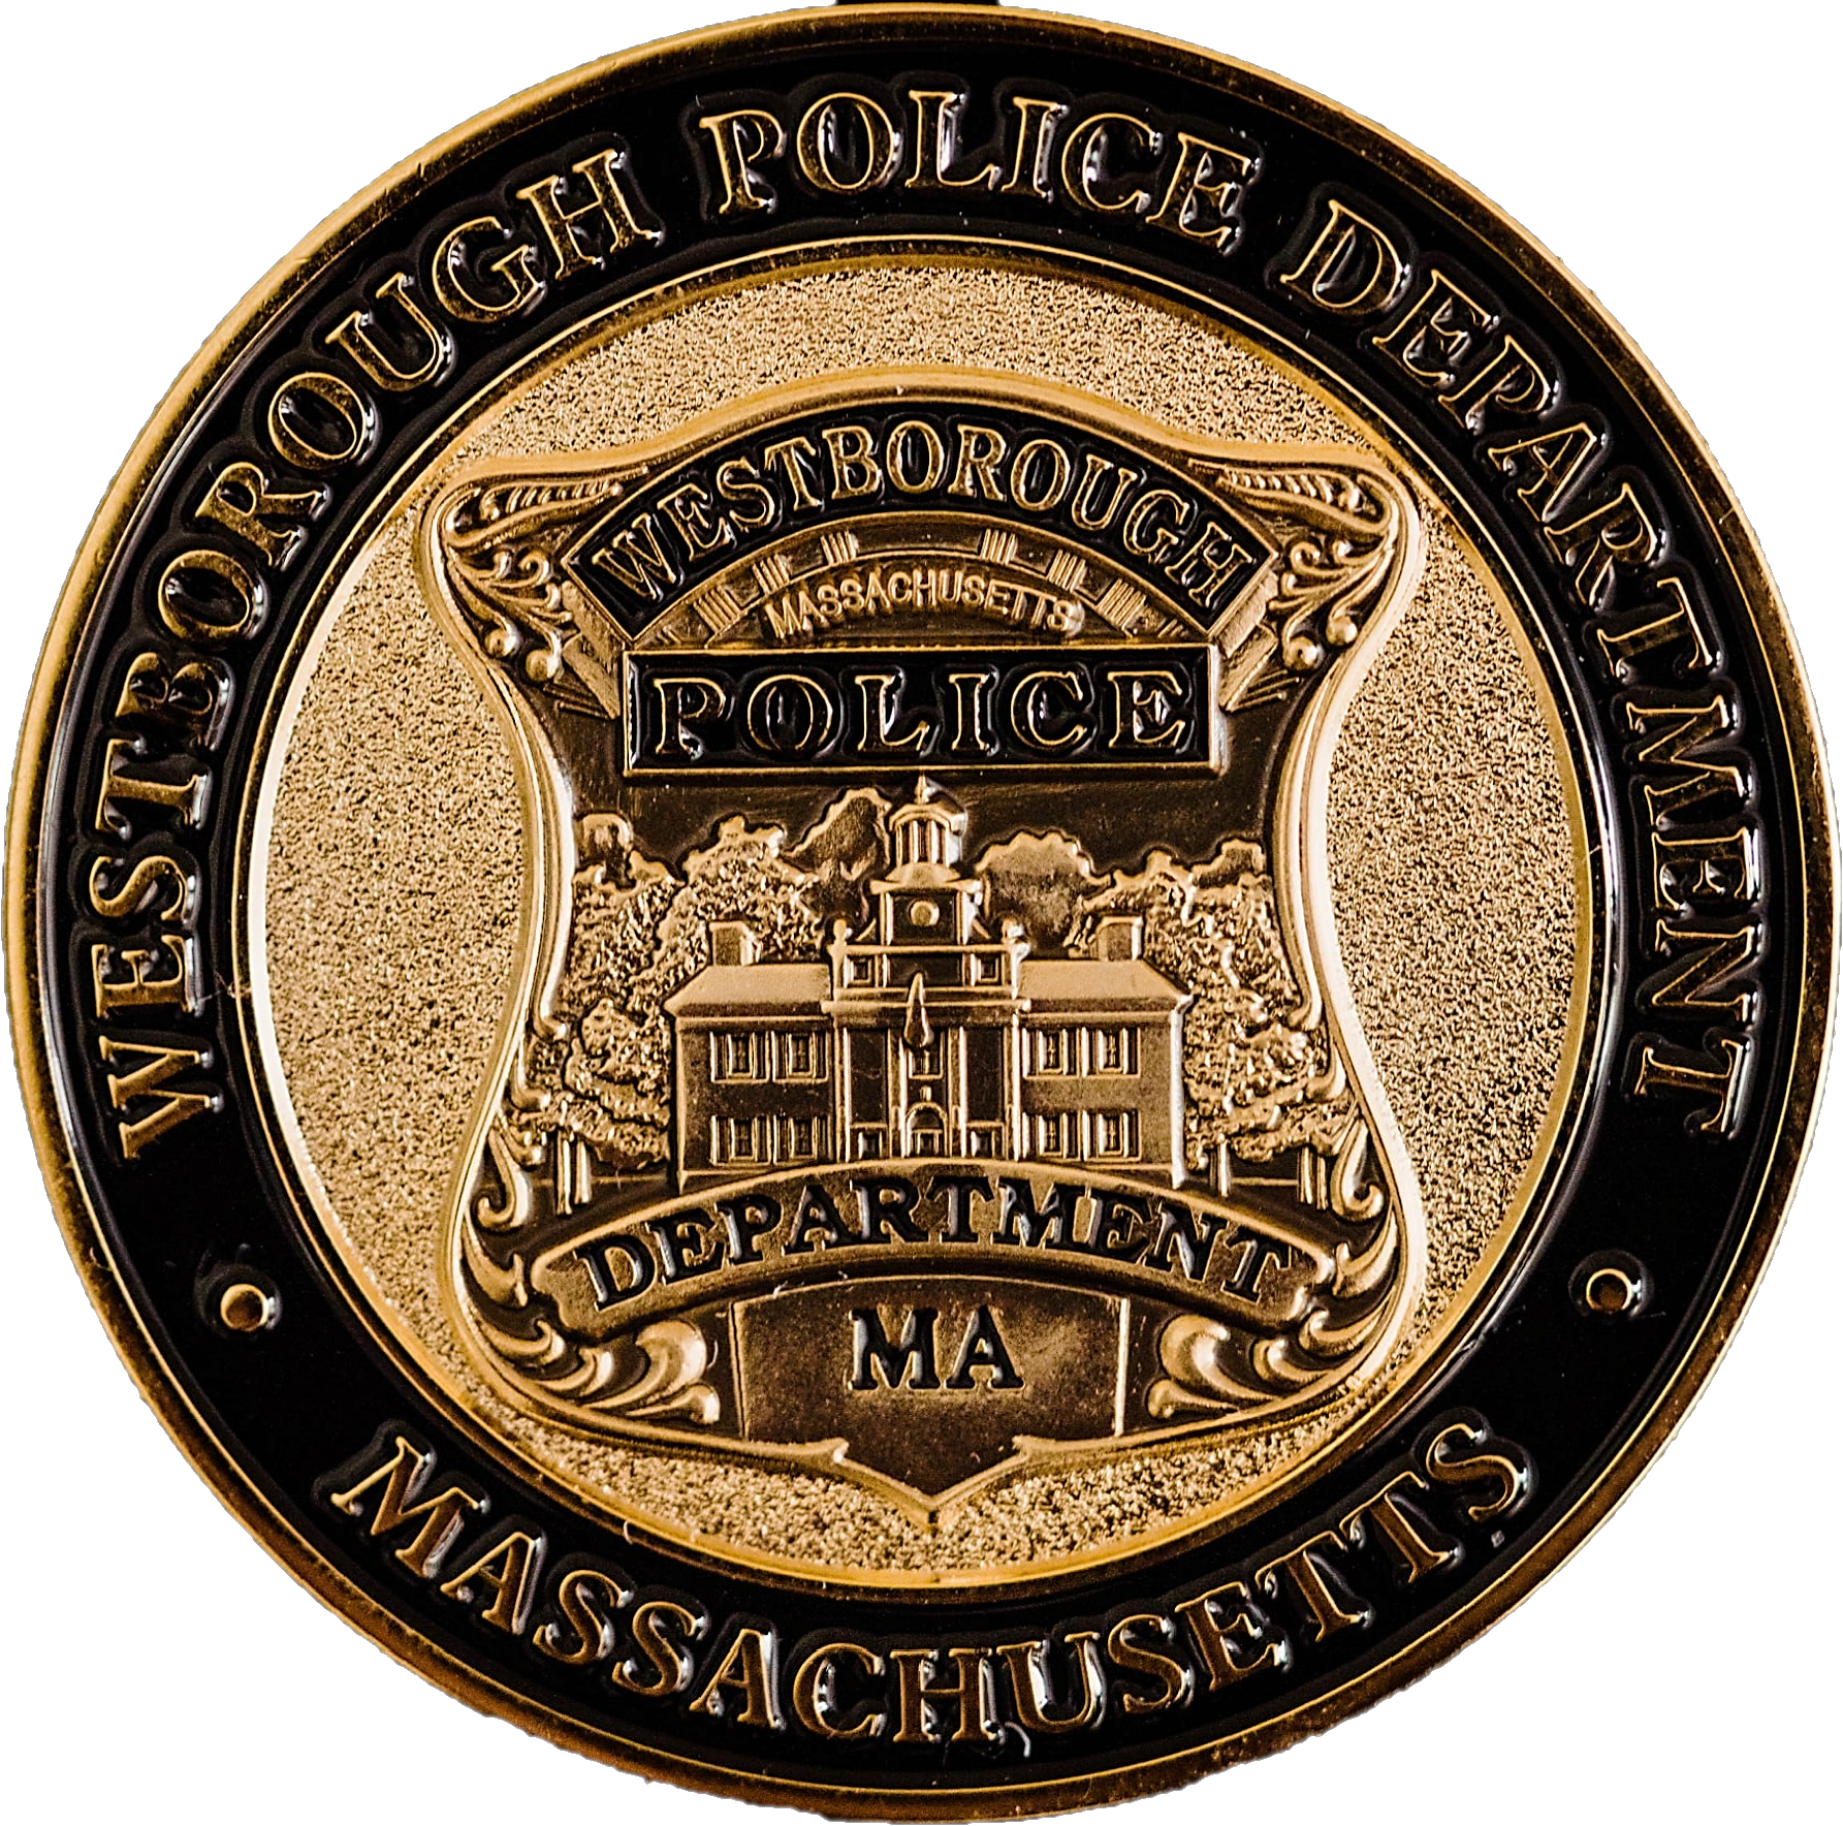 Westborough Police Department, MA Public Safety Jobs